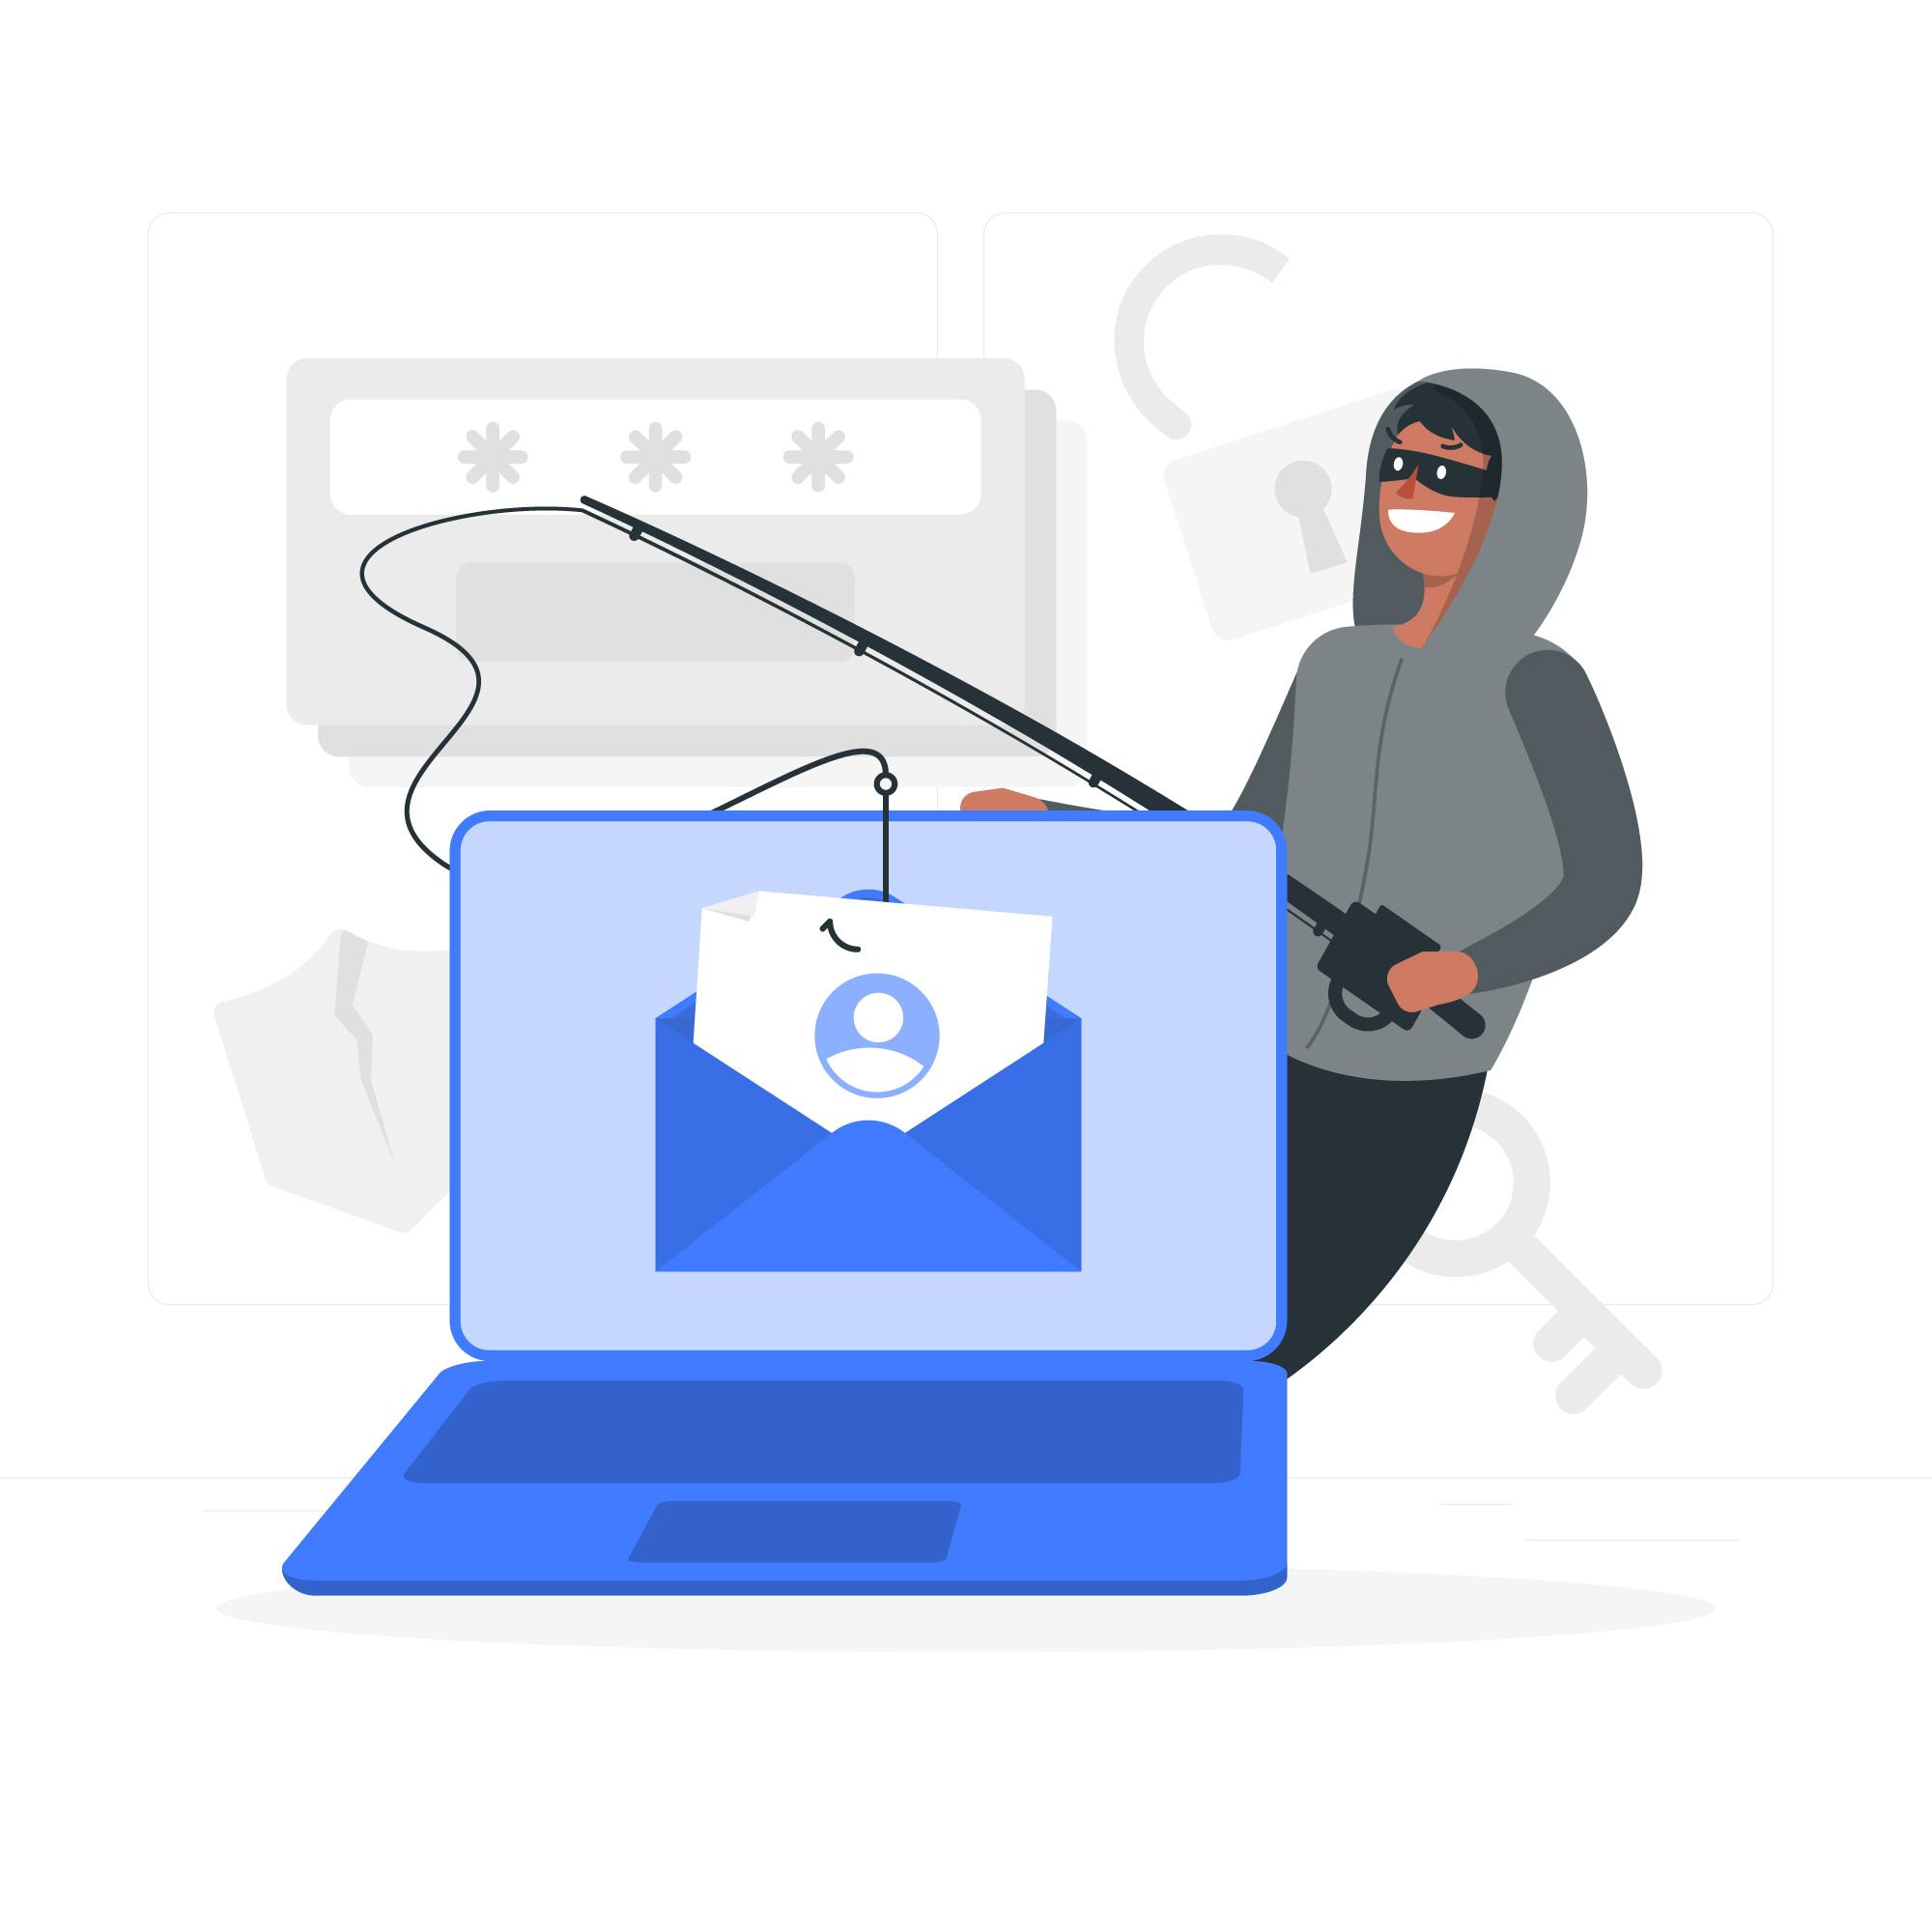 a threat actor phishing a user via email